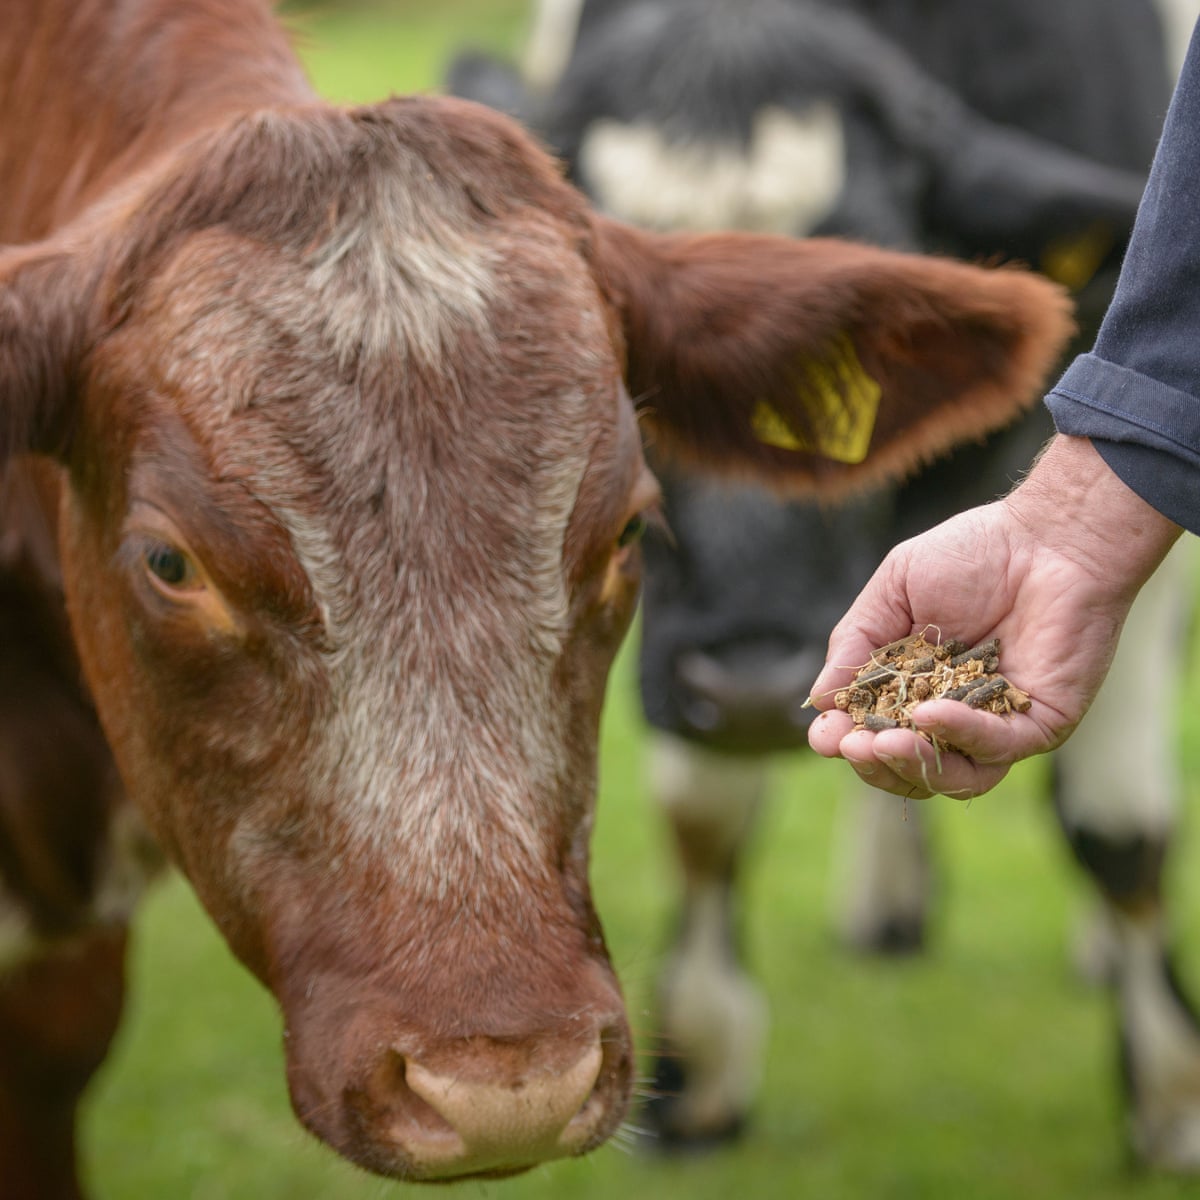 Farm animals can eat insects and algae to prevent deforestation | Farming |  The Guardian